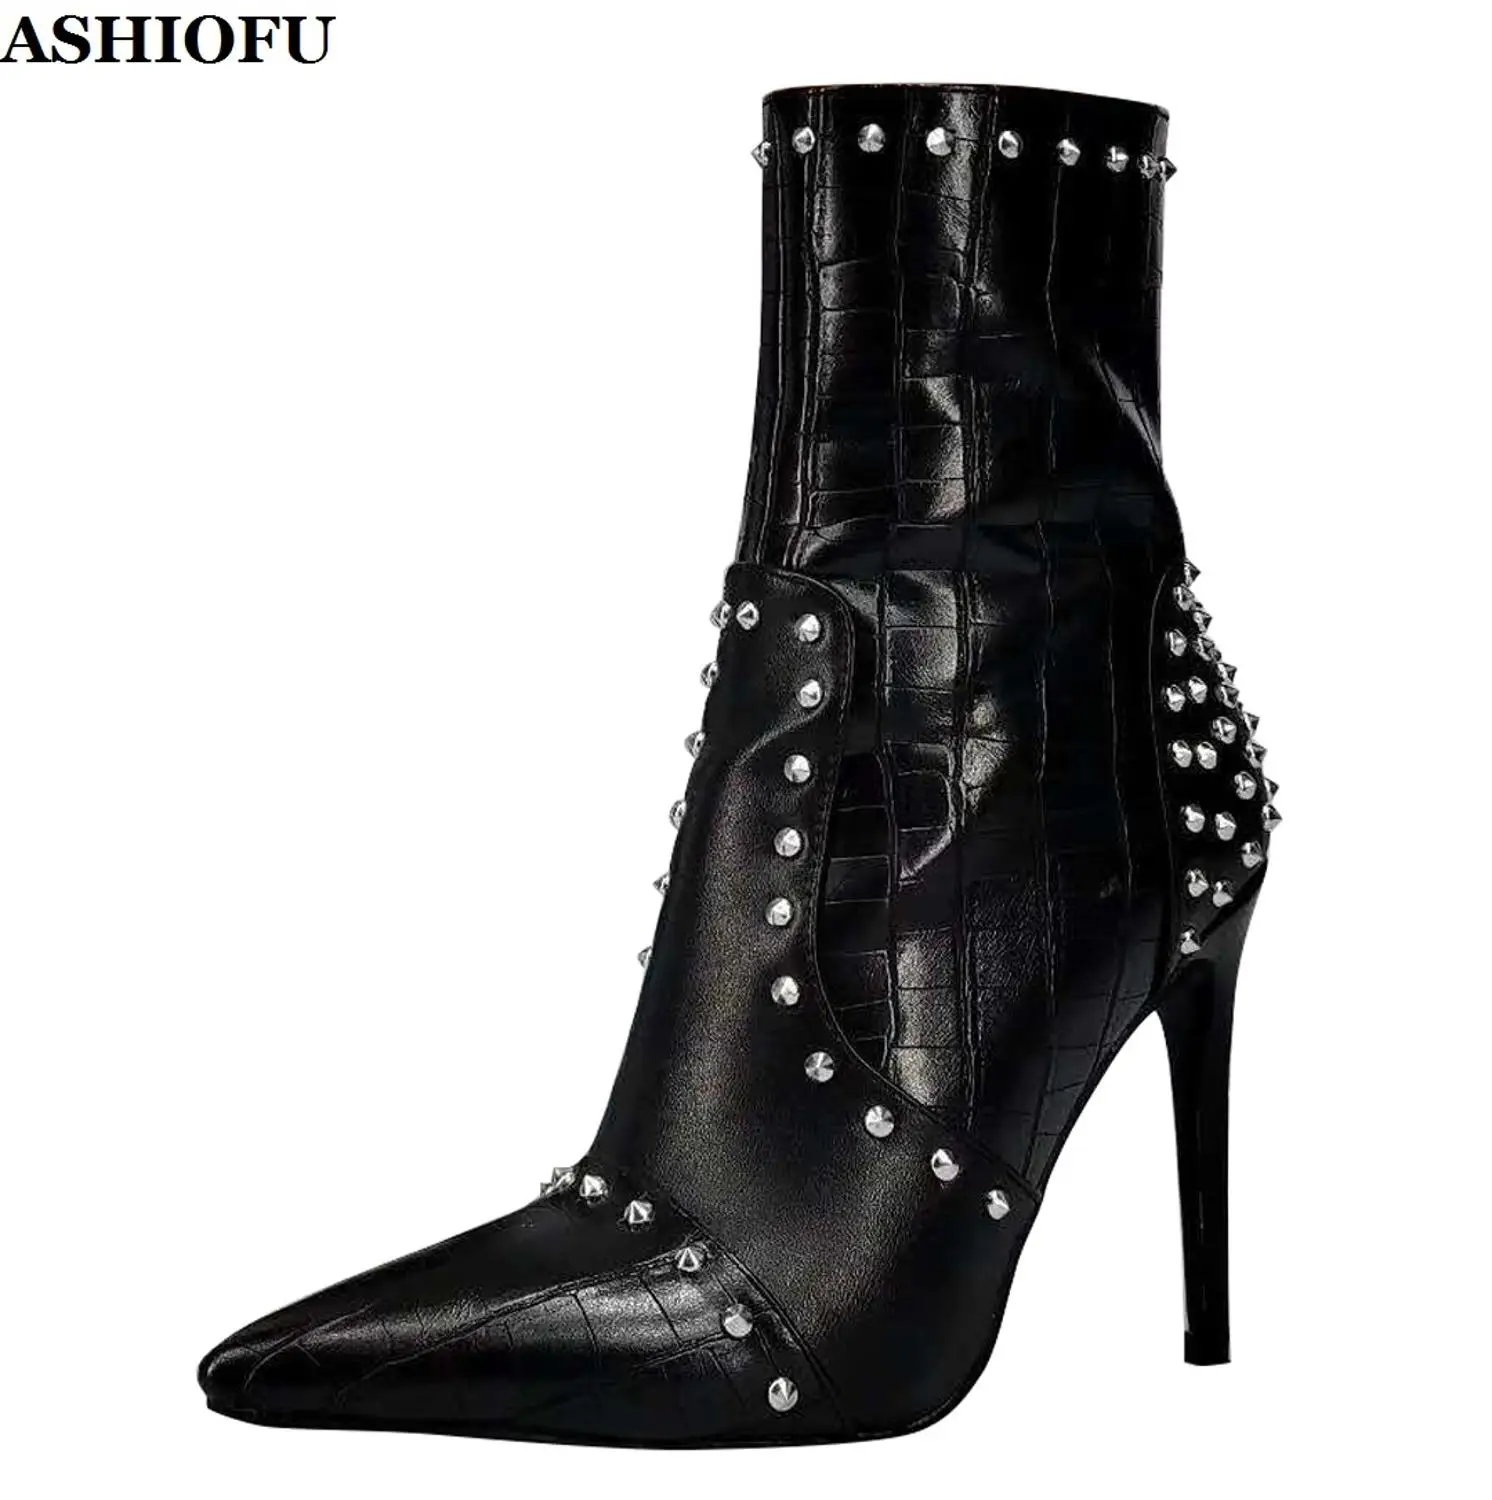 

ASHIOFU 2020 New Ladies High Heel Boots Real Photos Rivets Studdeds Pointy Ankle Booties Large Size Evening Fashion Short Boots